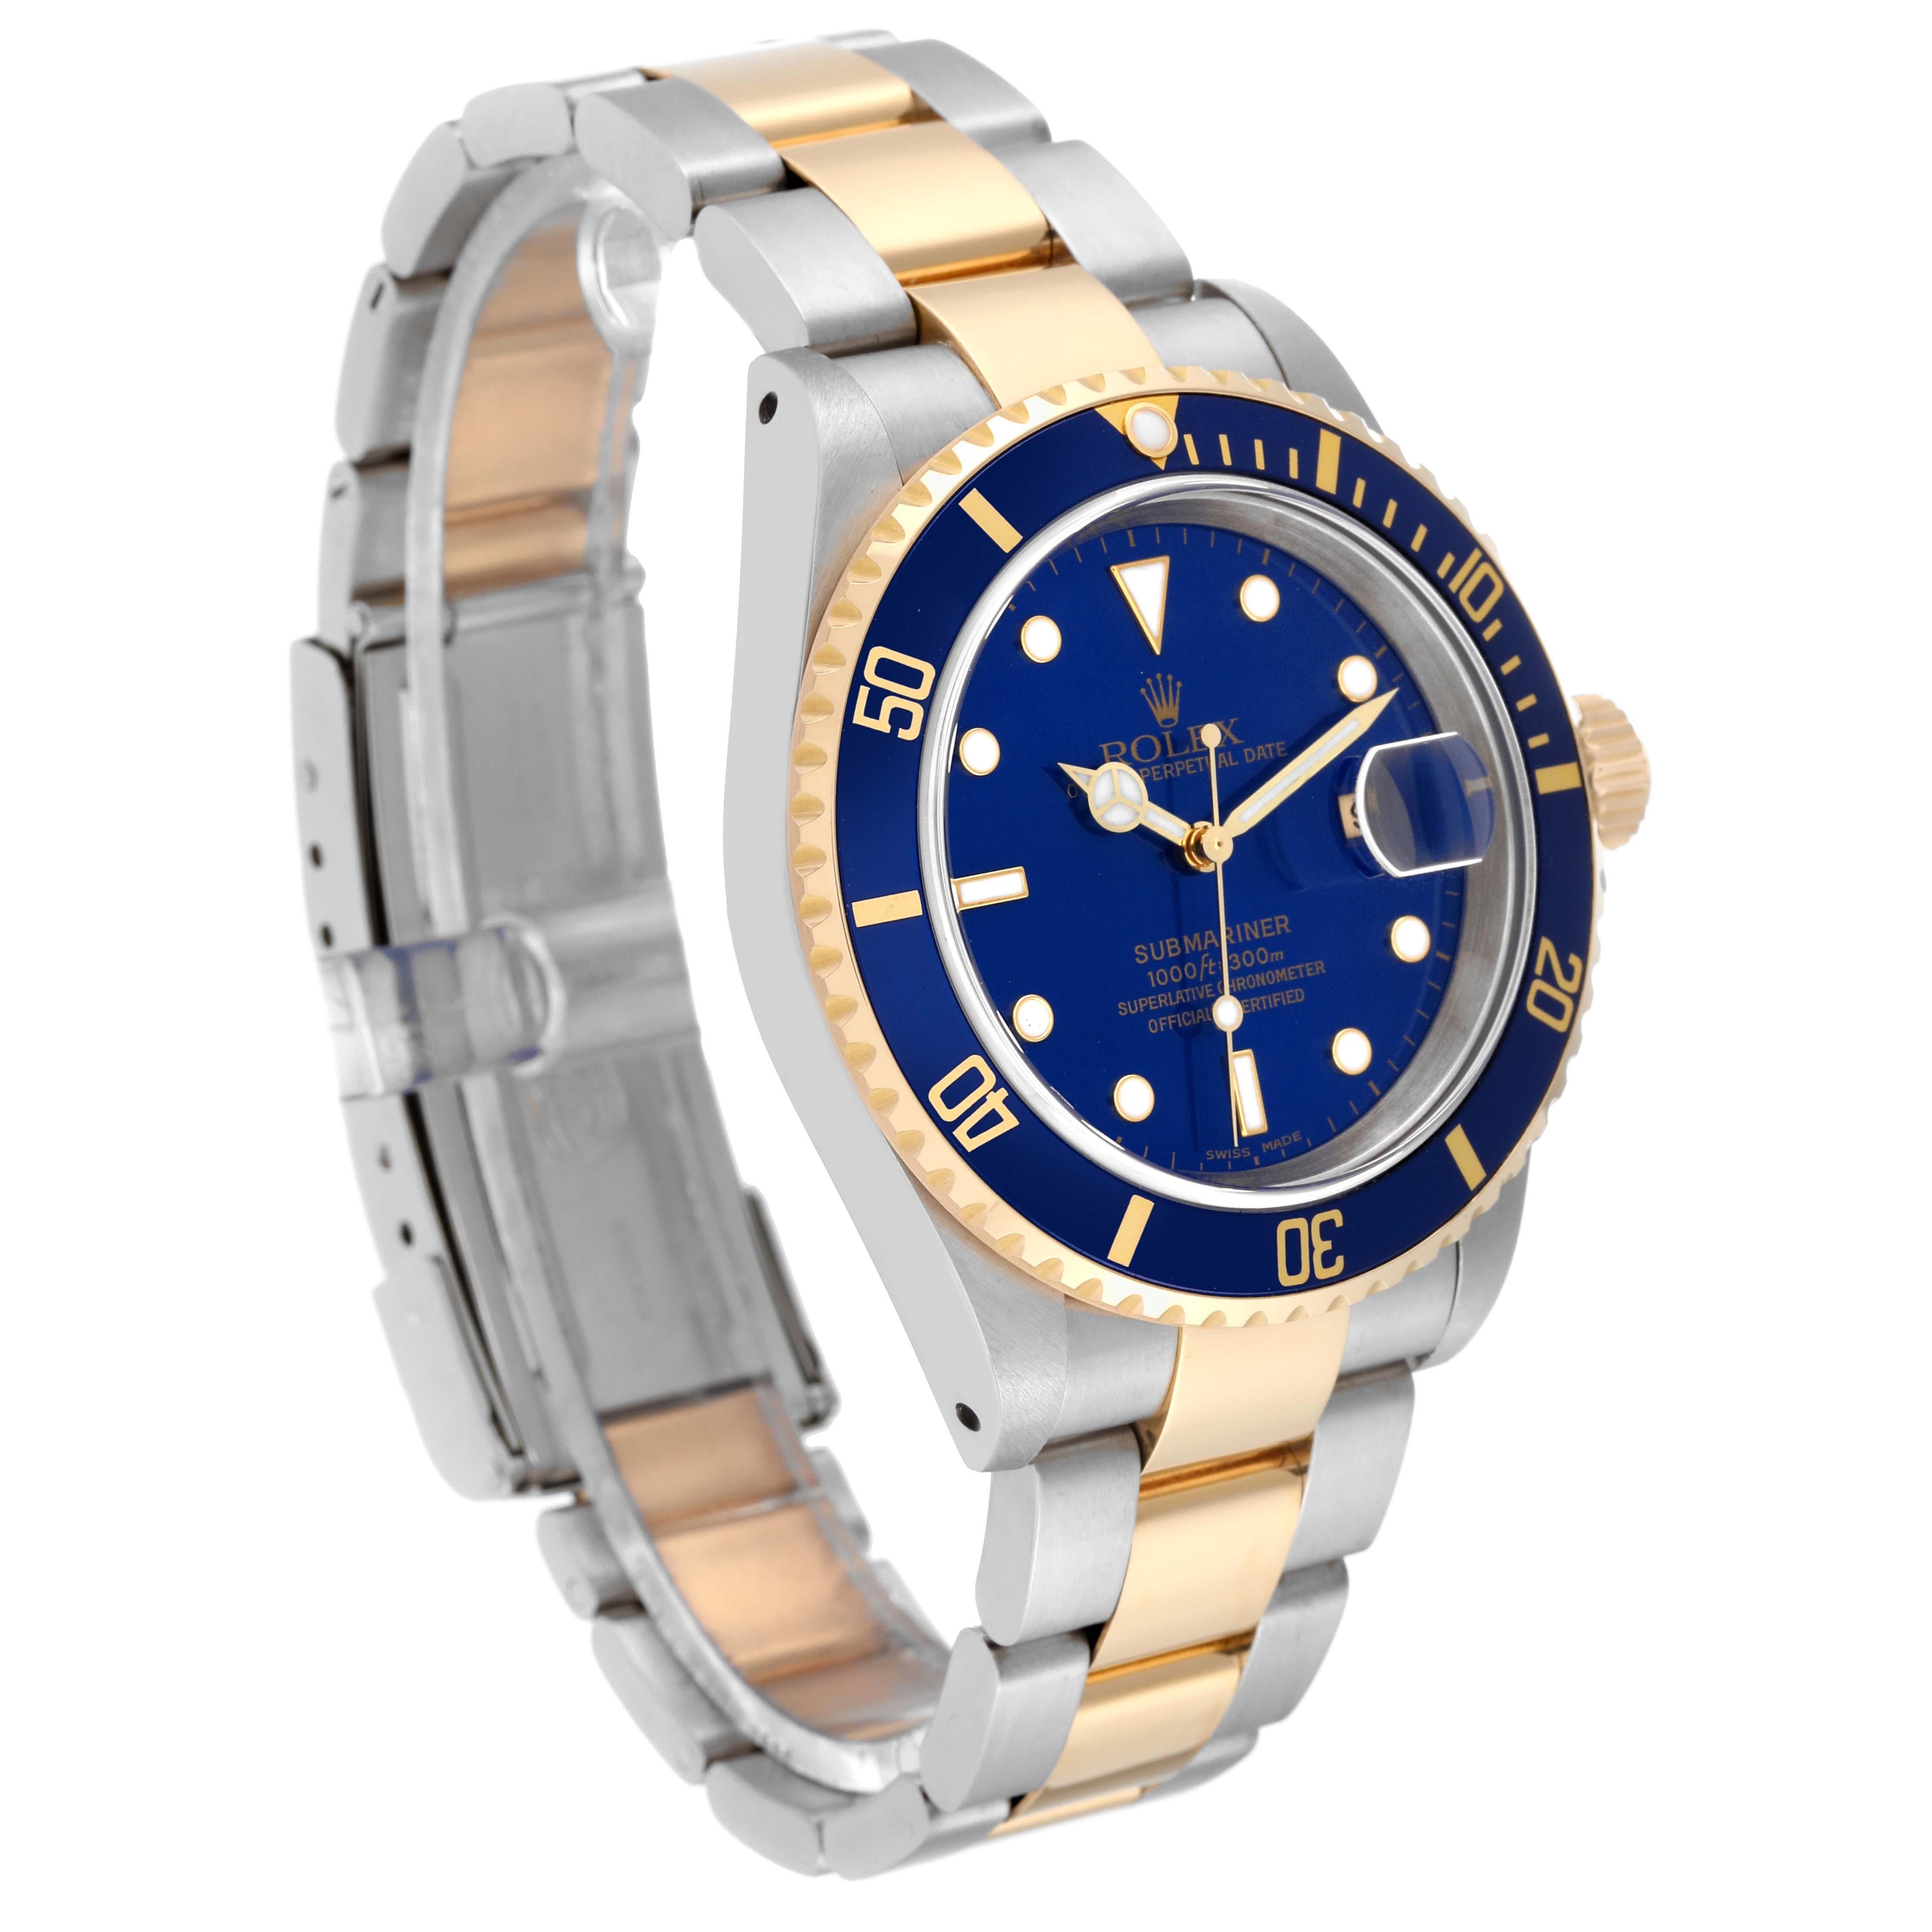 Rolex Submariner Blue Dial Steel Yellow Gold Mens Watch 16613 For Sale 2